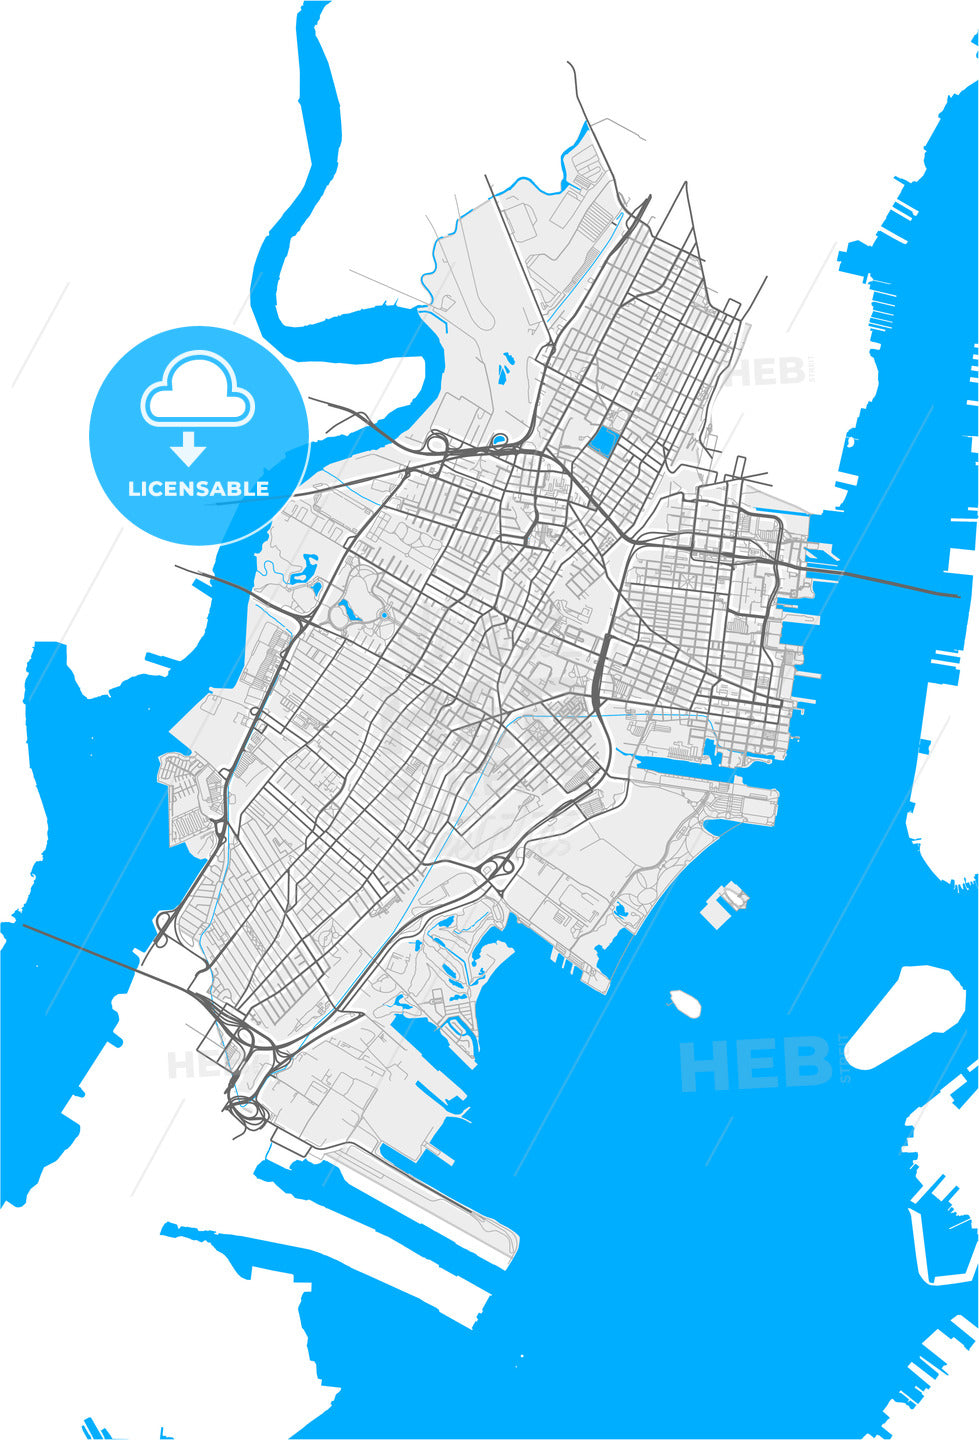 Jersey City, New Jersey, United States, high quality vector map